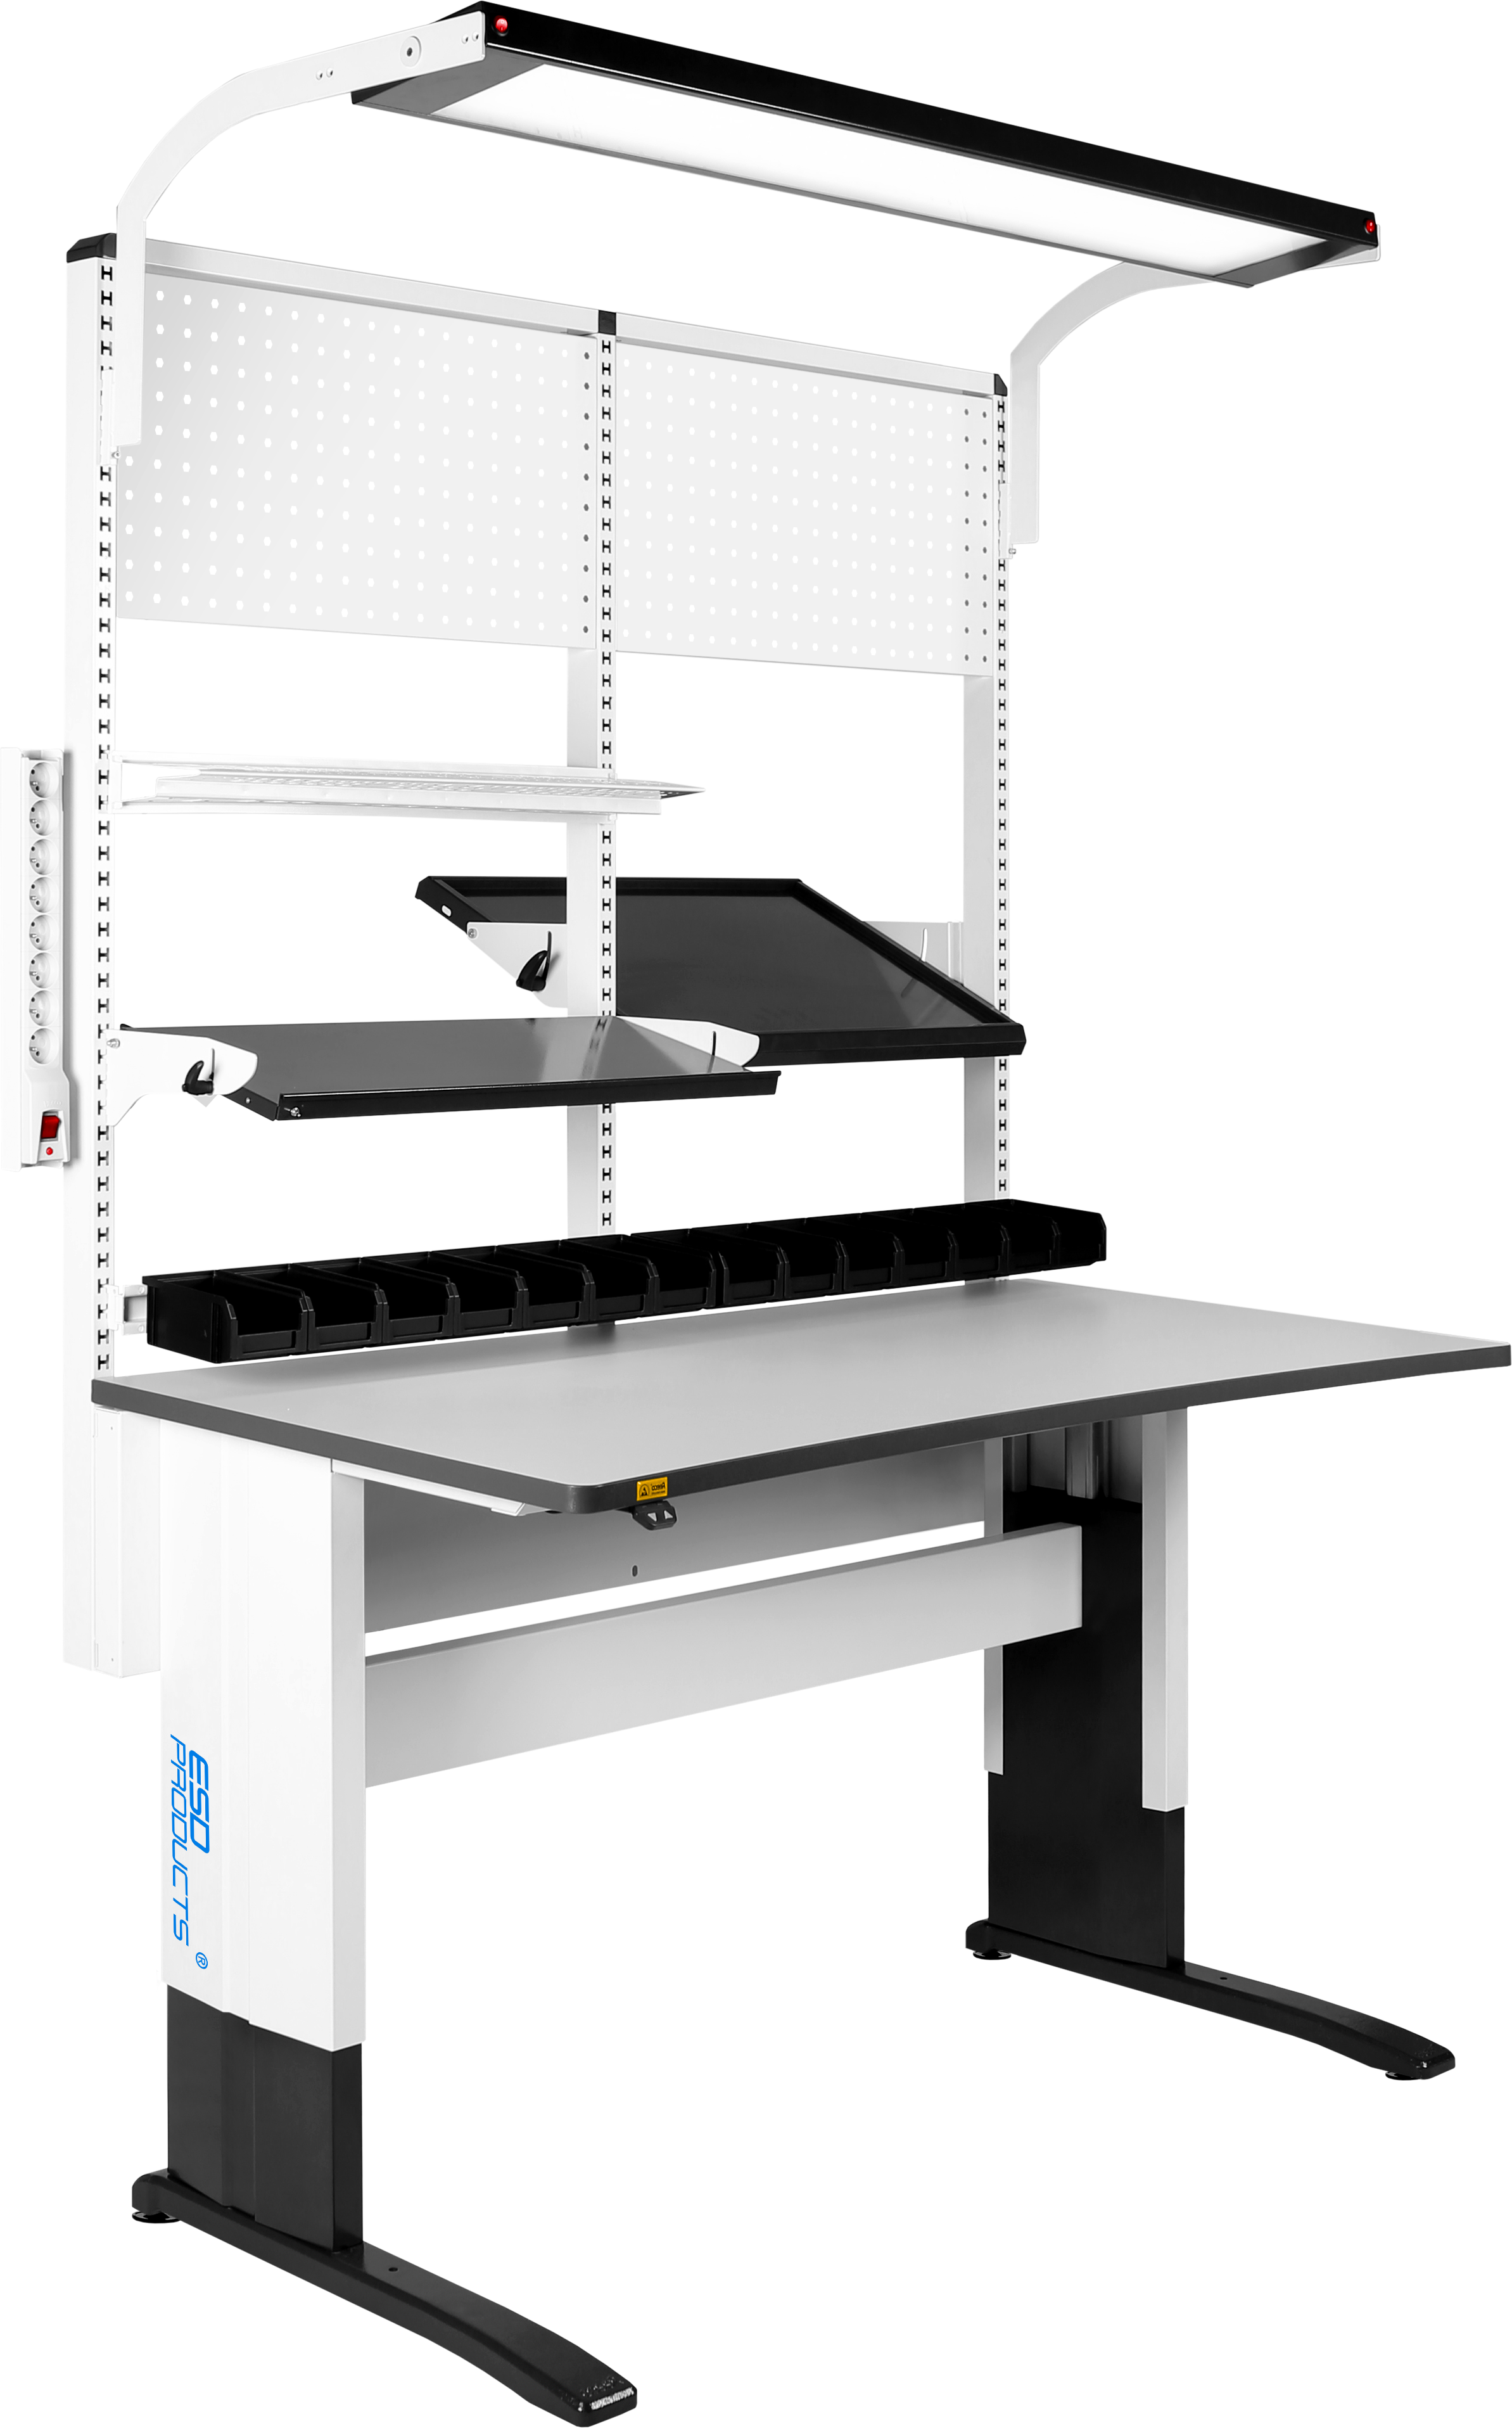 ESD-Workstation-Electrically-Adjustable-Standard-Rectangular-Table-Top-Reeco-Robert-1830-x-750-mm-ESD-Products-AES